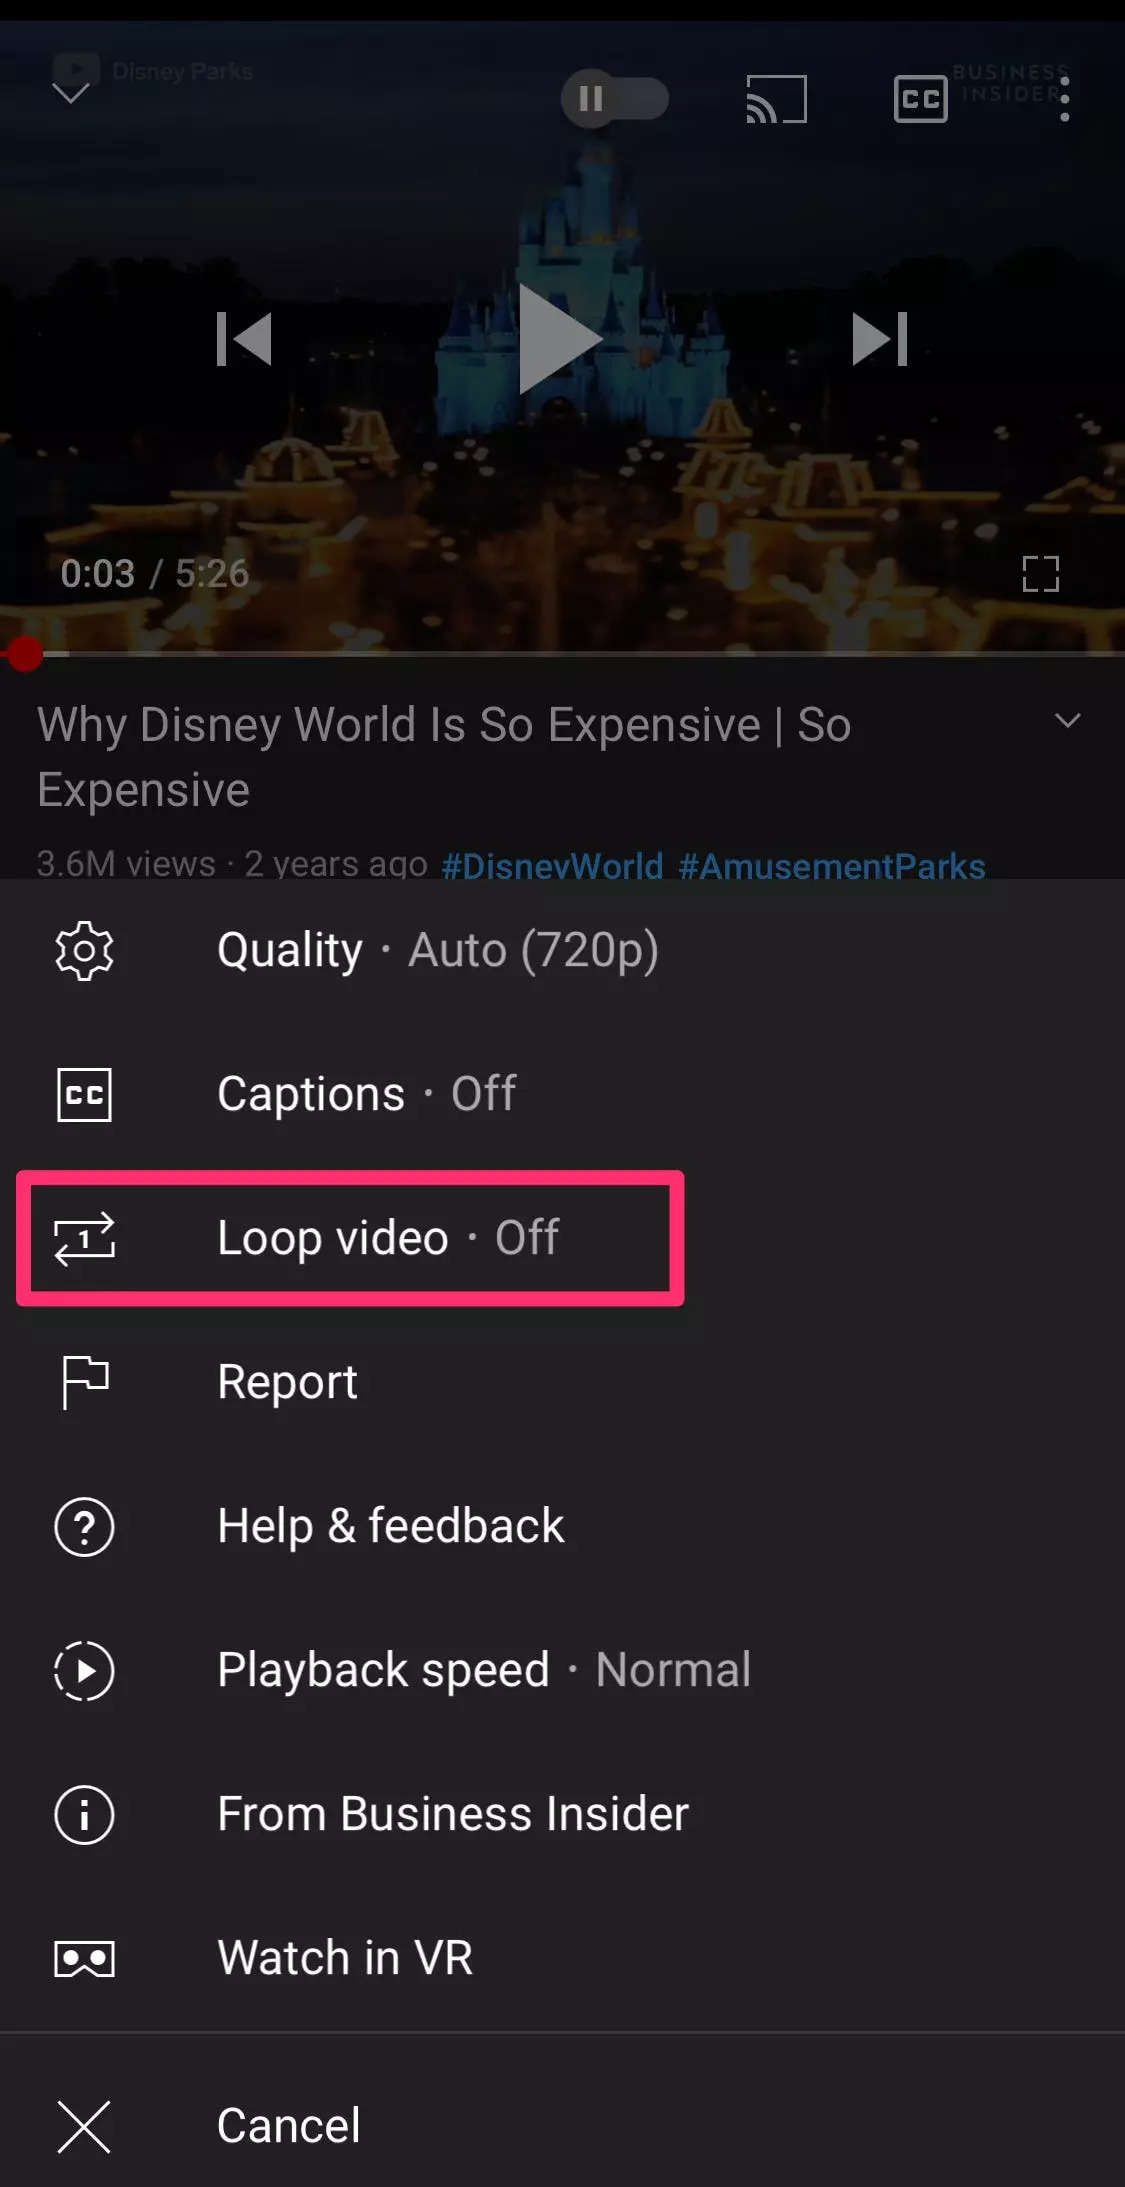 Looking for ways to loop a  video on computer or in mobile app? Know  how - India Today